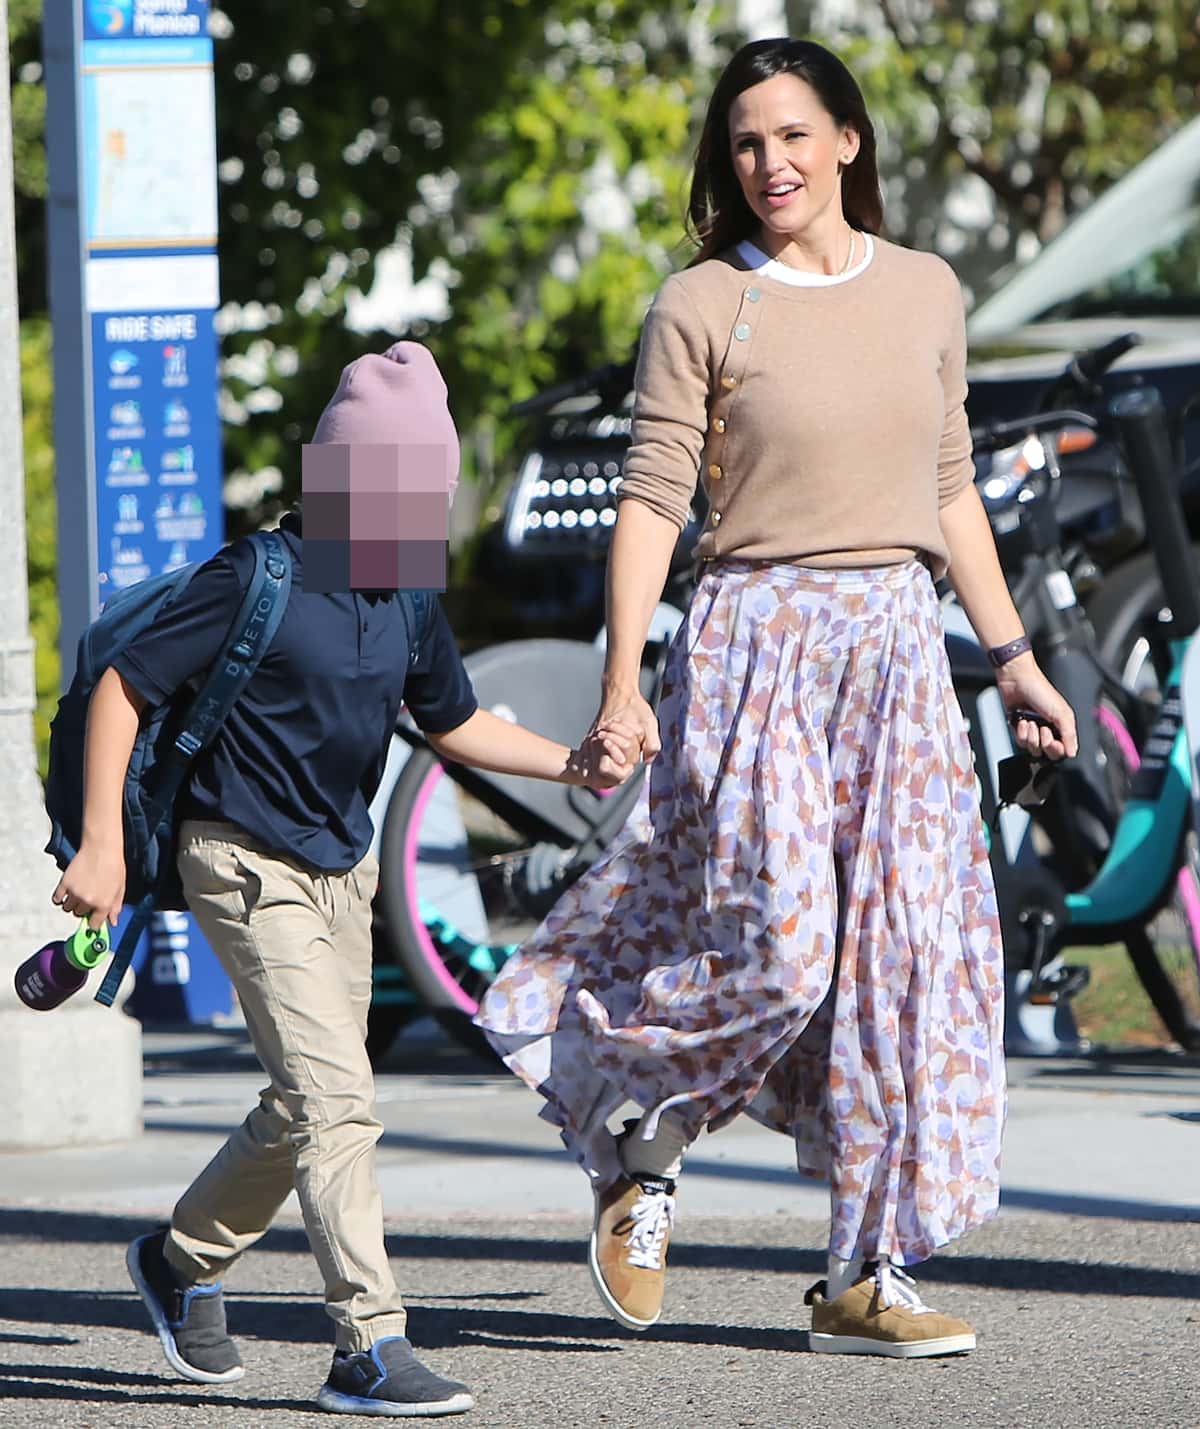 Wearing Altuzarra's beige Minamoto button-embellished cashmere sweater with a French Riviera long skirt by LHD and Chanel suede calfskin sneakers, Jennifer Garner holds hands with her son Samuel Affleck in Santa Monica on October 26, 2021